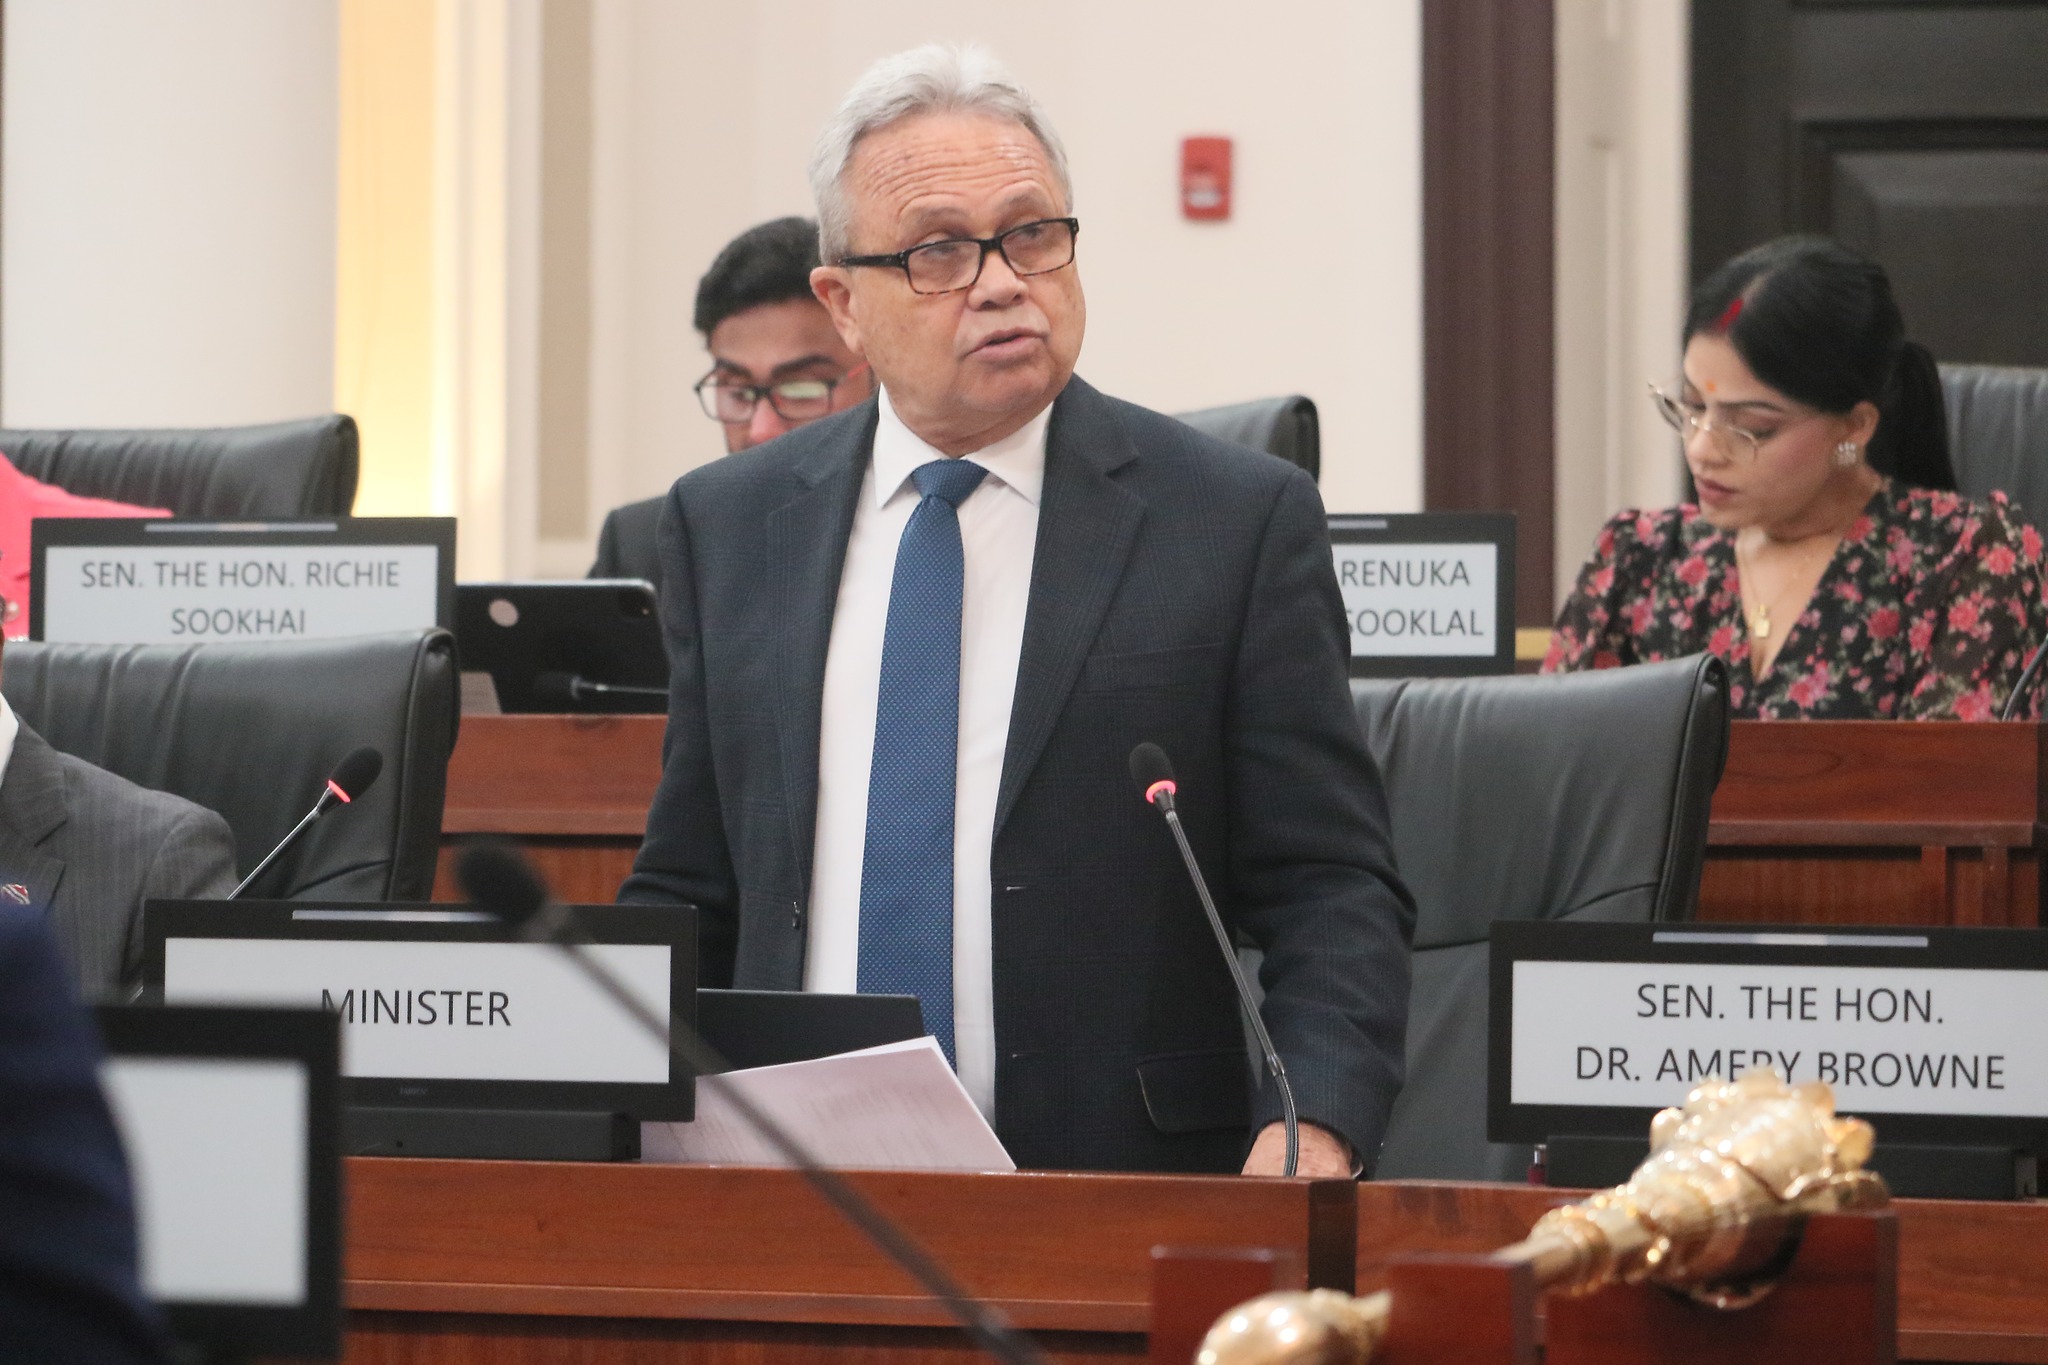 Imbert: Kamla lying! Government has no intention to raise VAT or increase other taxes